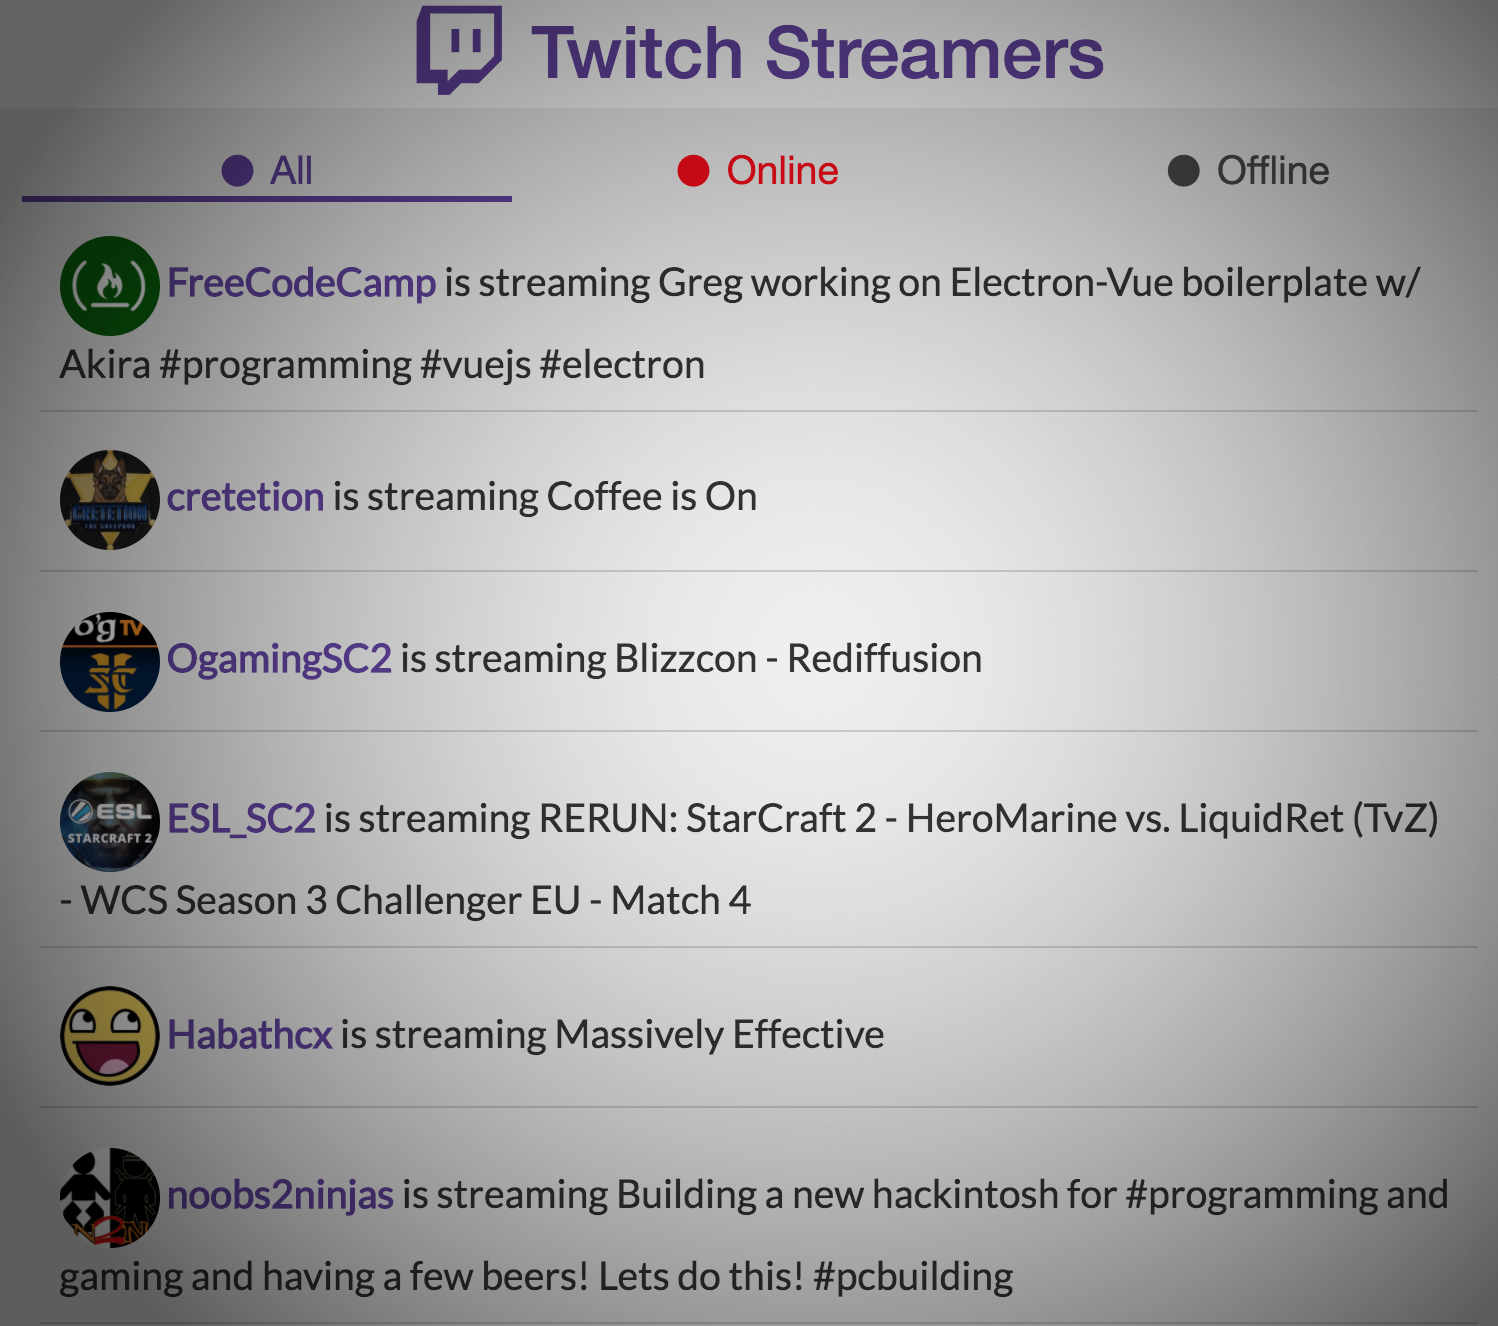 betterttv for twitch app